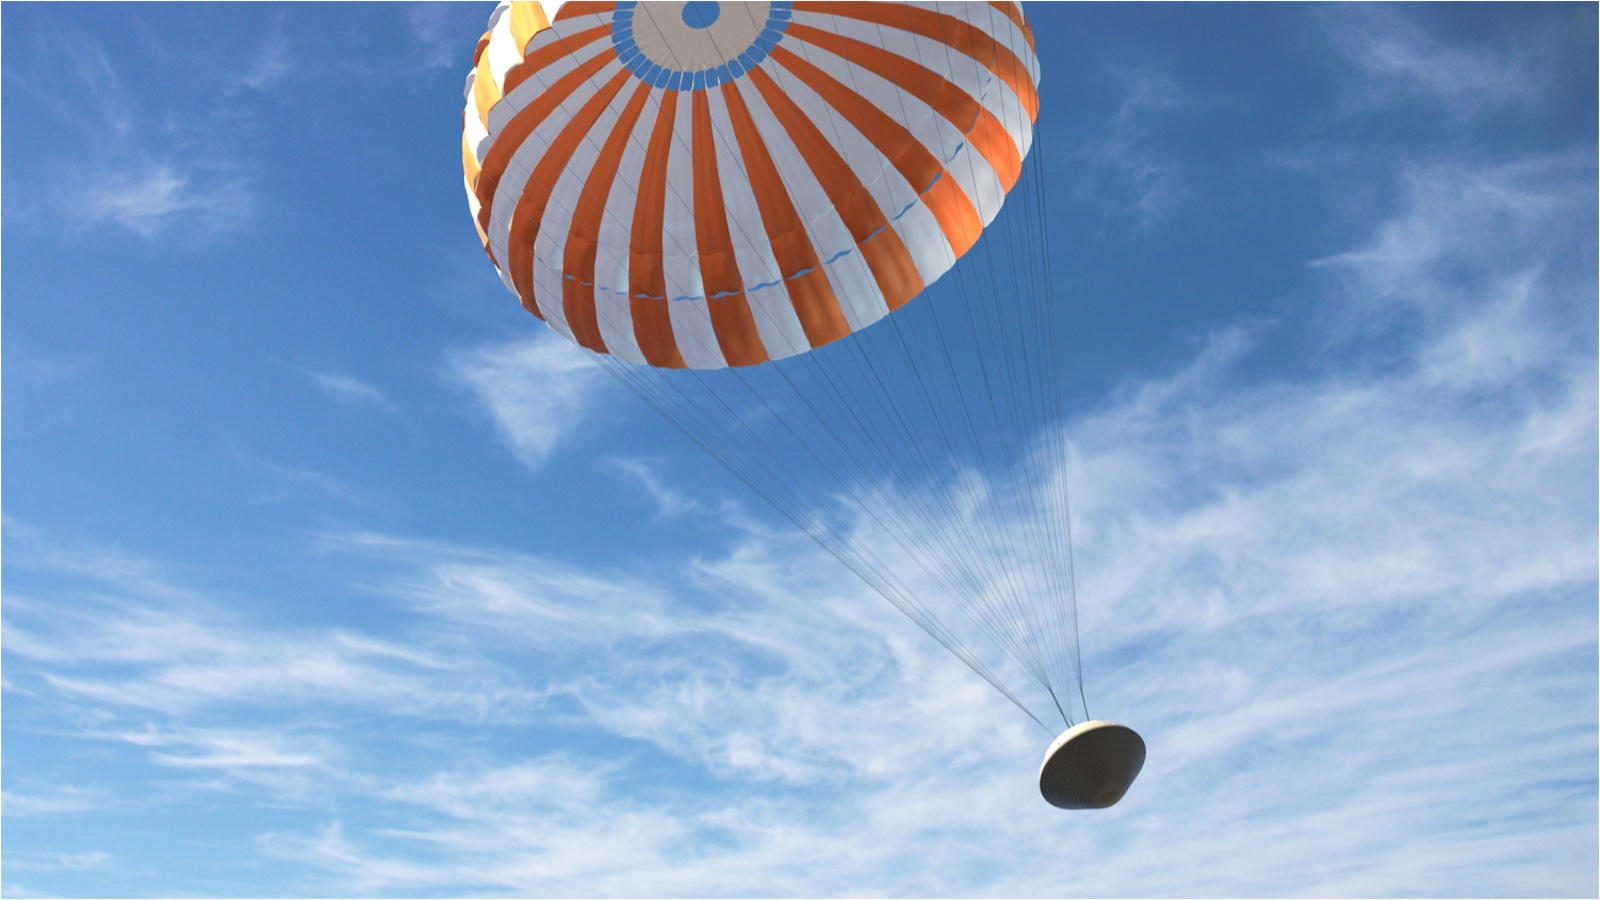 An orange and white parachute flying in the sky, lowering a capsule to the ground